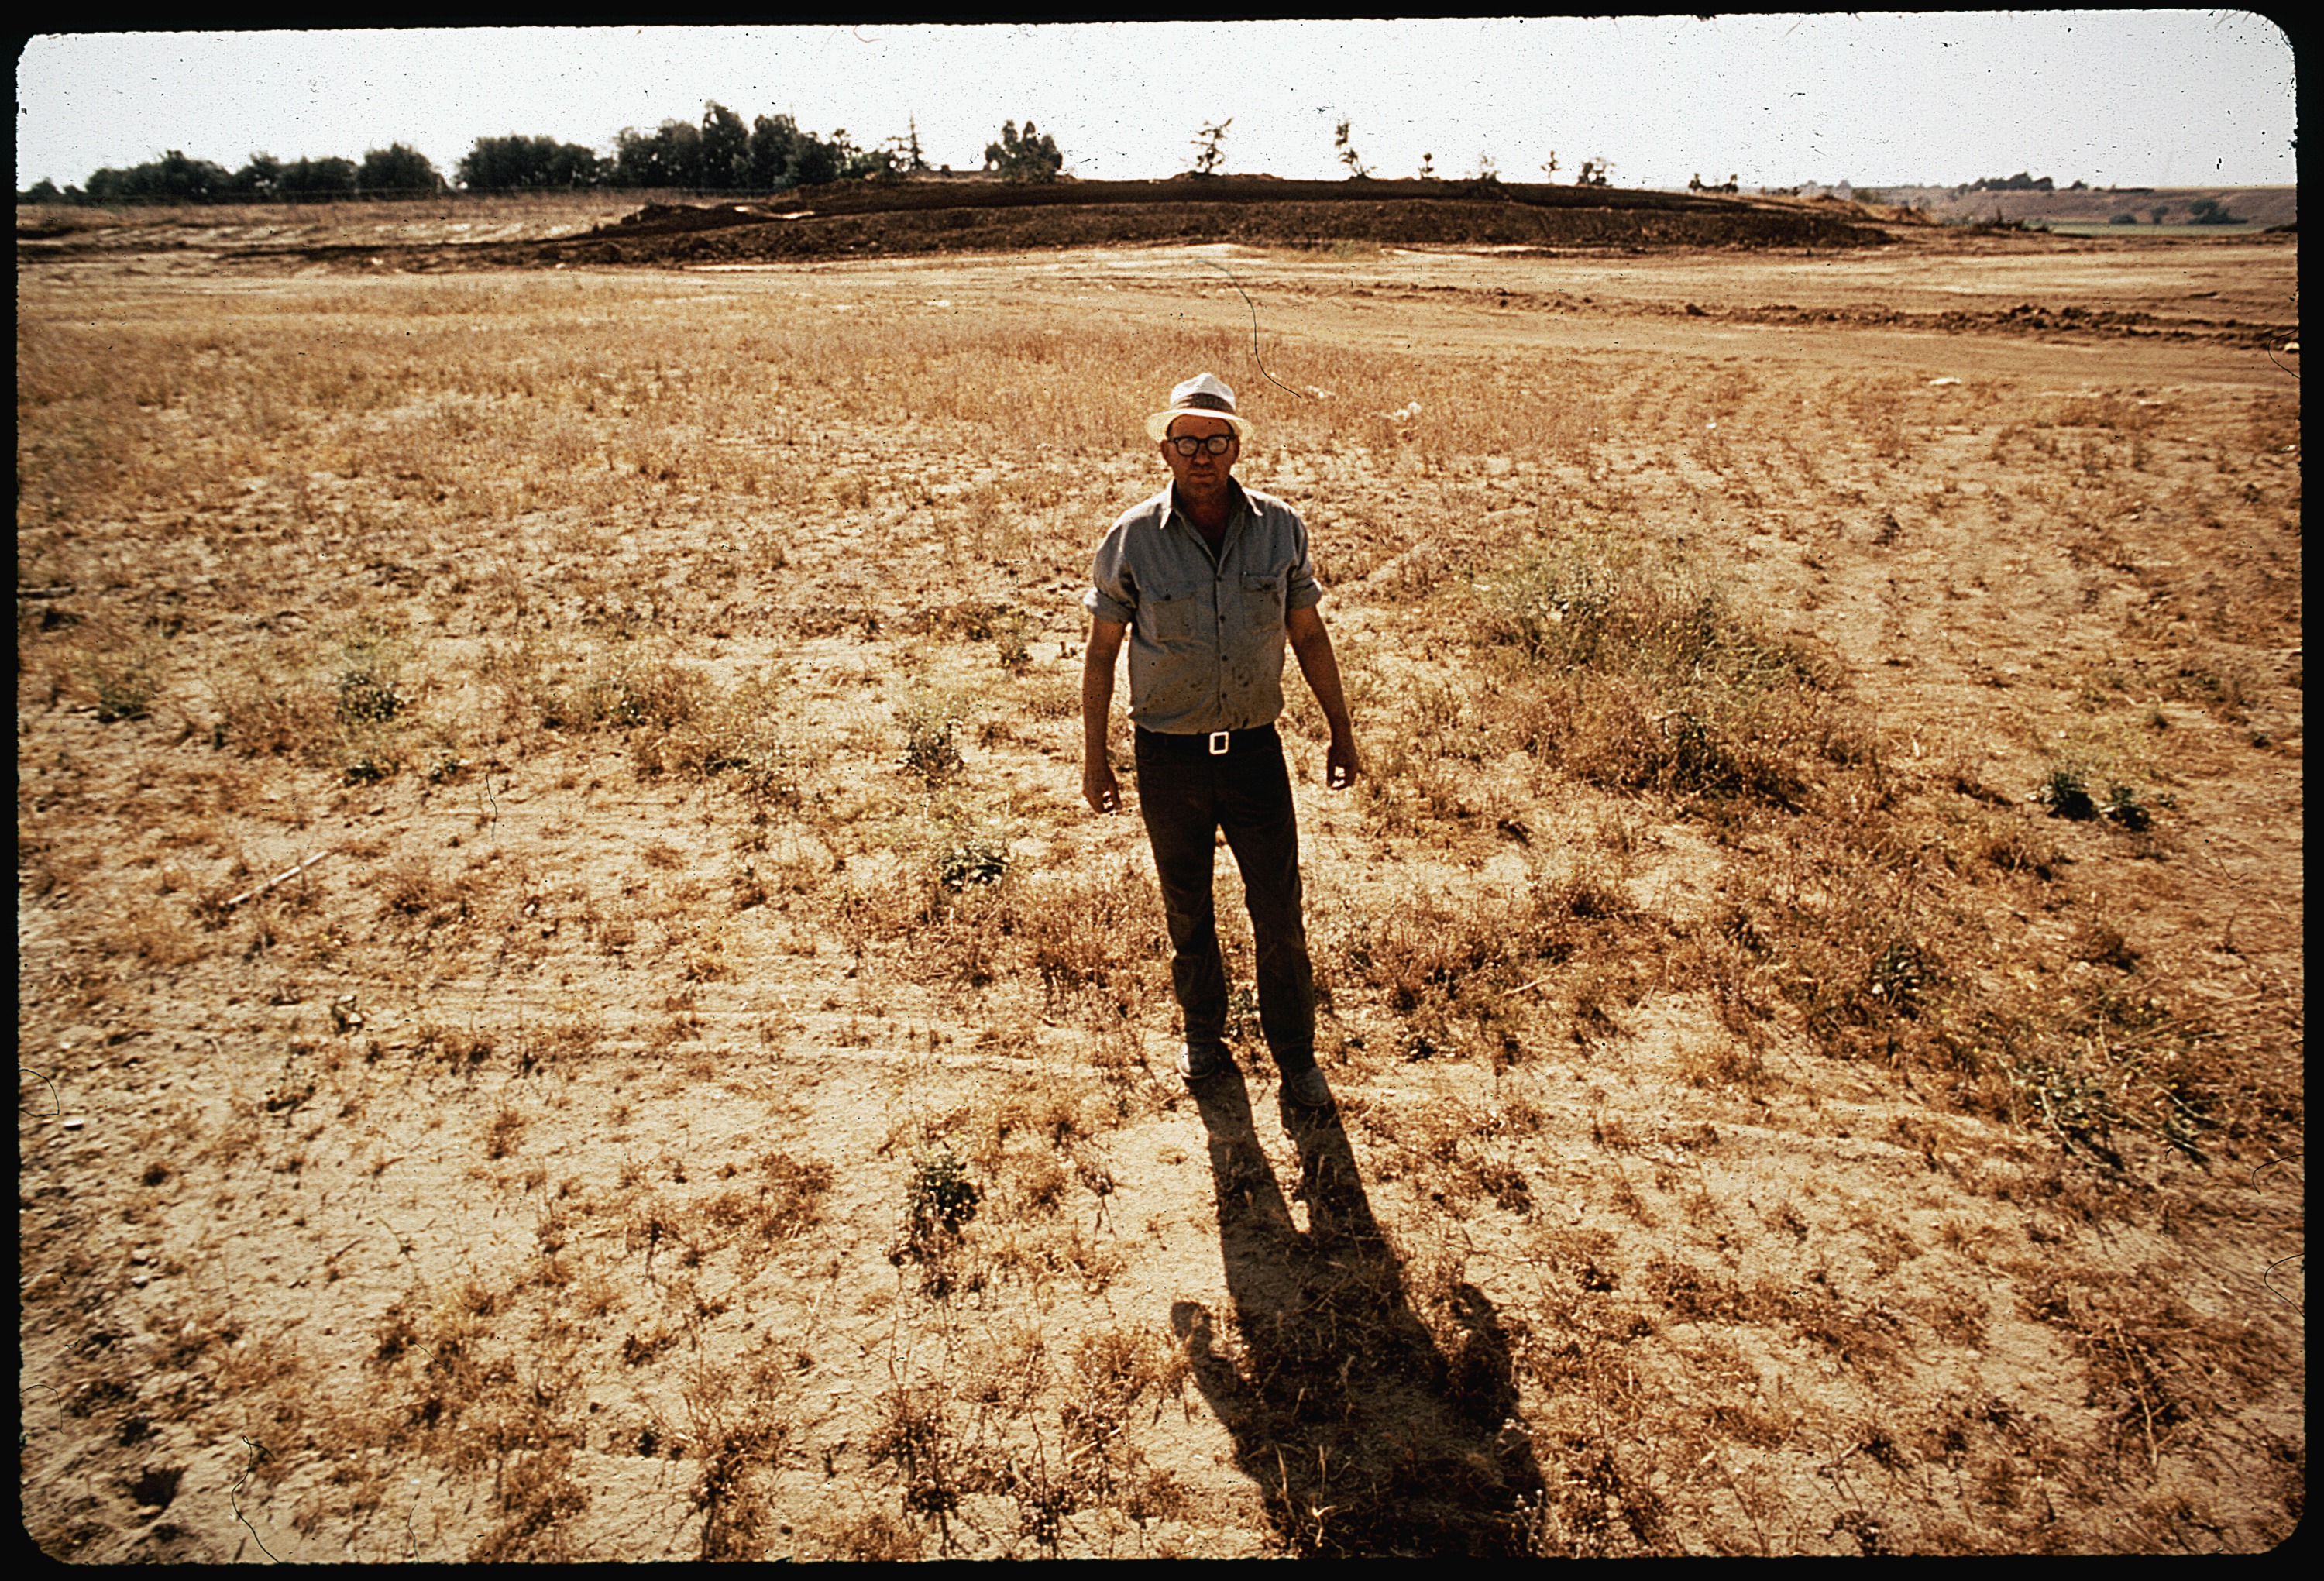 CLYDE KEPLEY, OWNER OF SANITARY LAND FILL, STANDS ON HIS 13 ACRE FINISHED AREA, WHICH HAS FILL DEPTHS TO 80 FEET - NARA - 542548